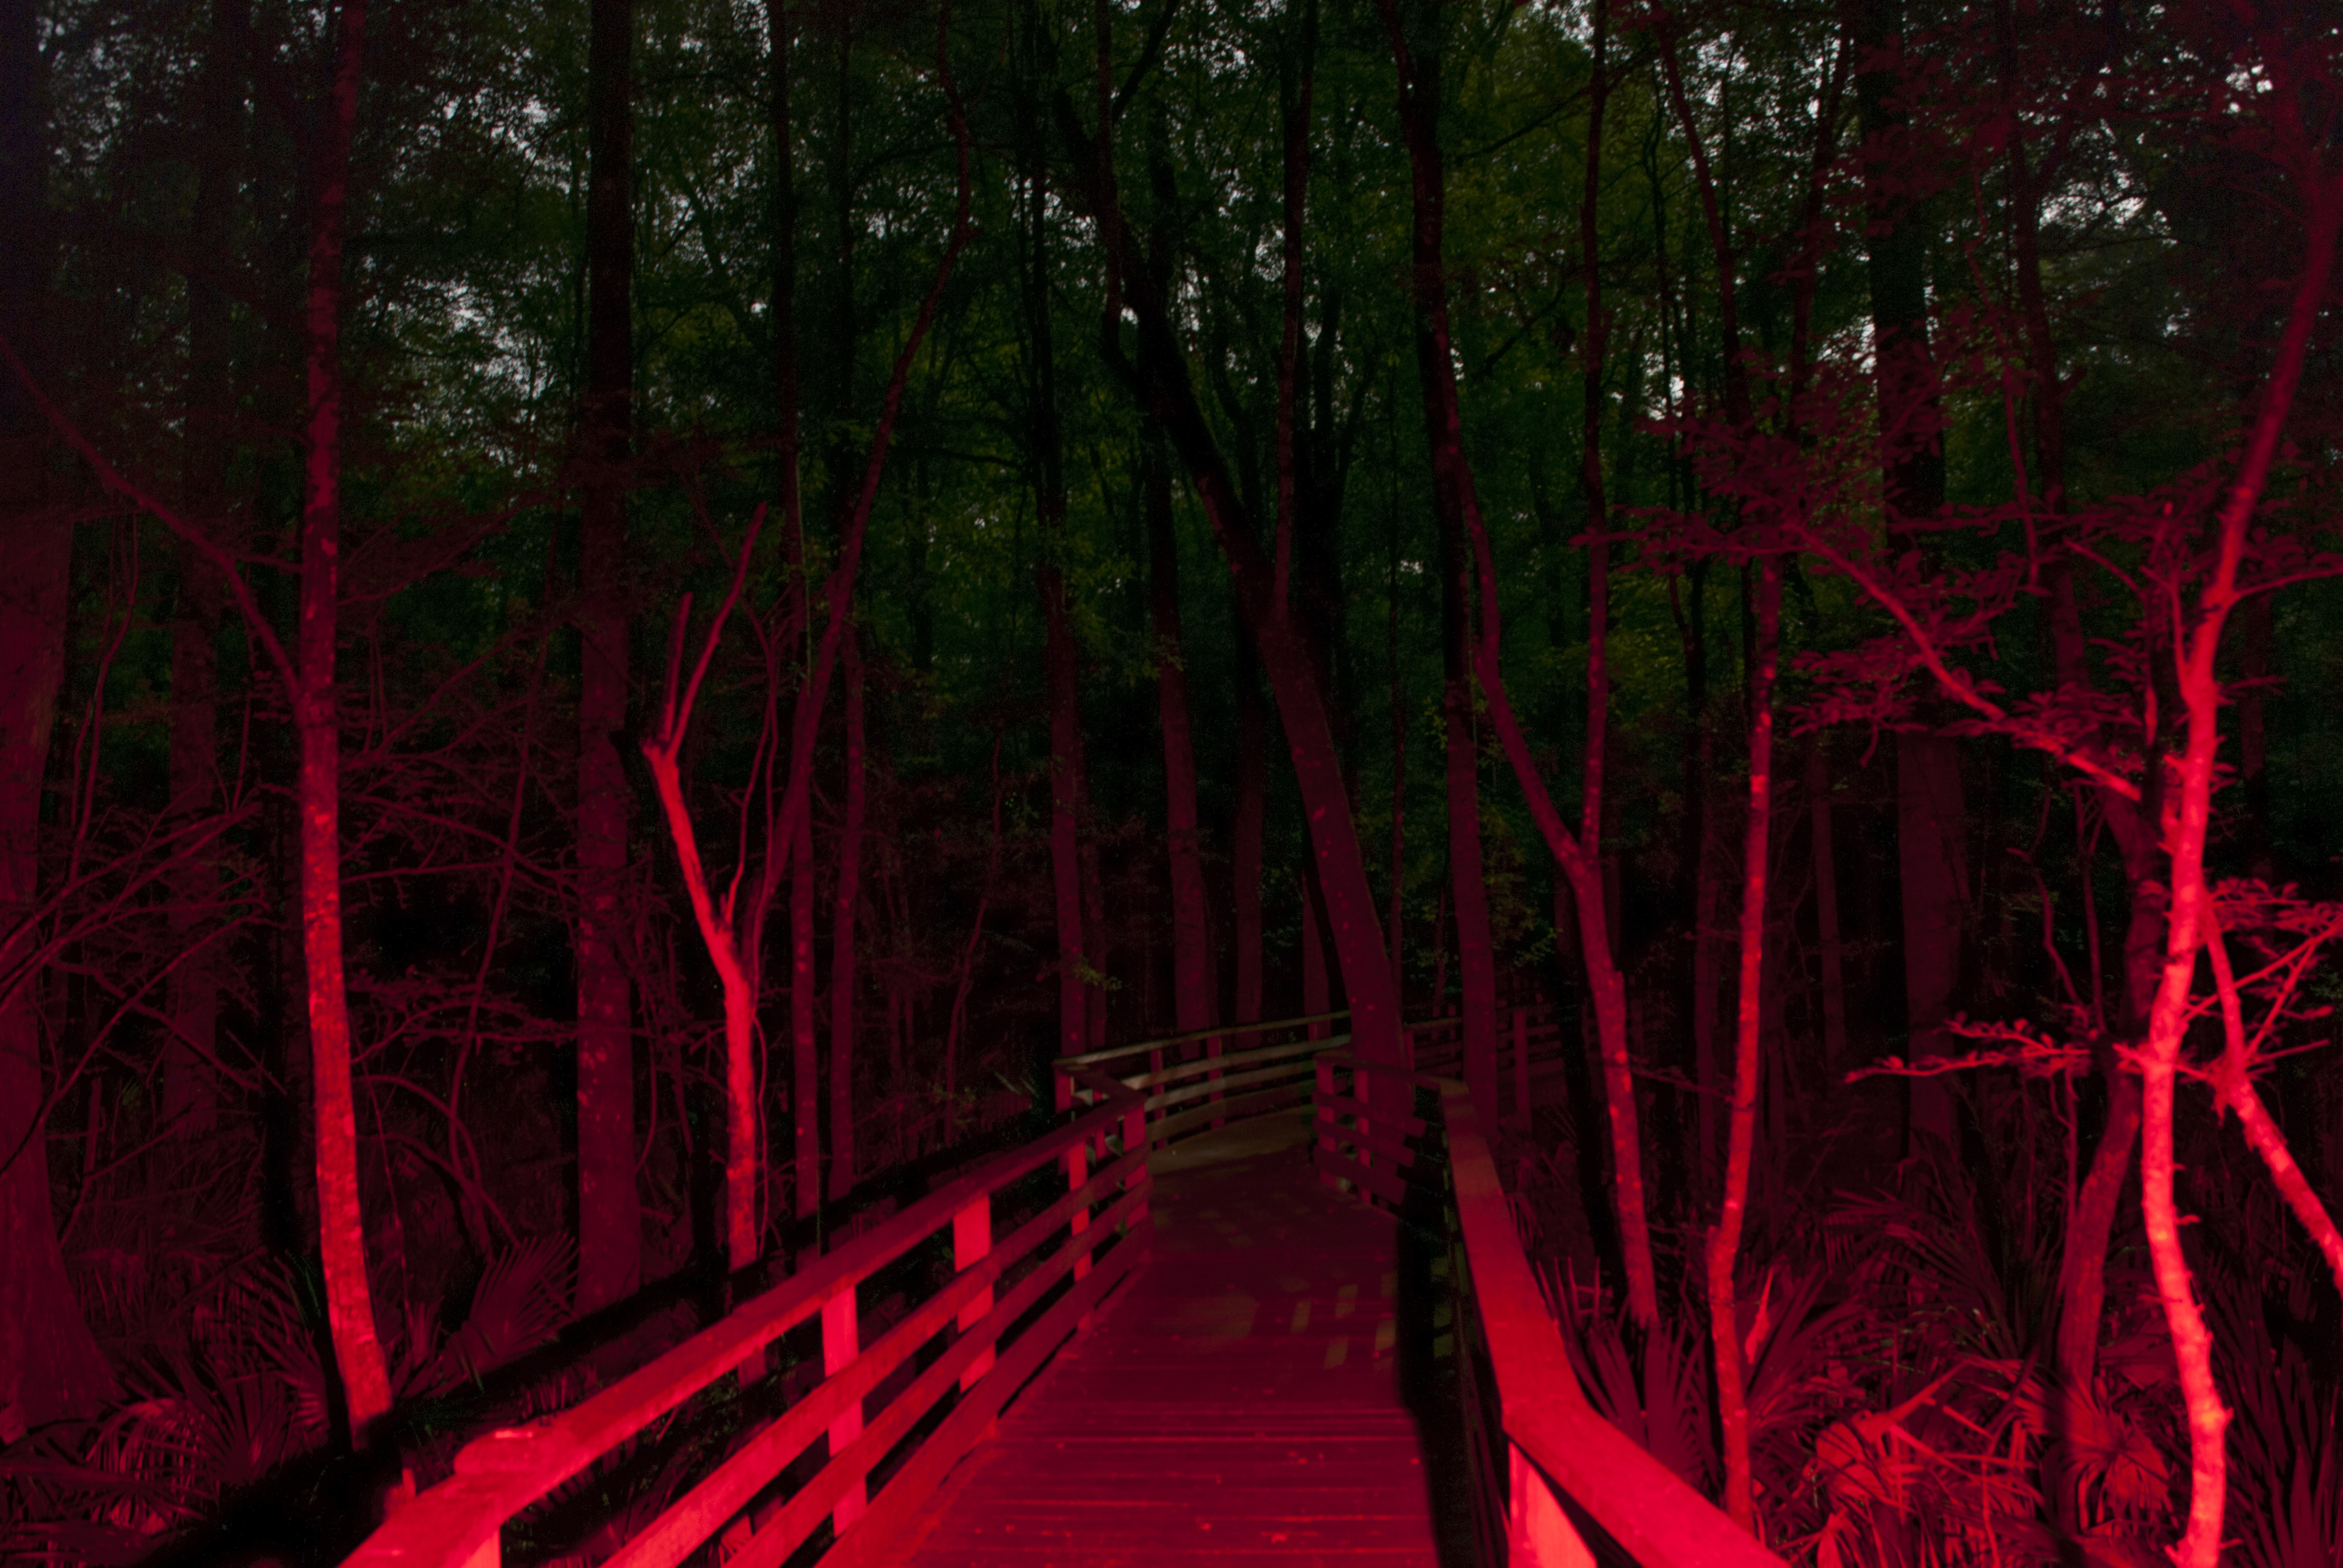 A red light omits across a very dark forest and boardwalk